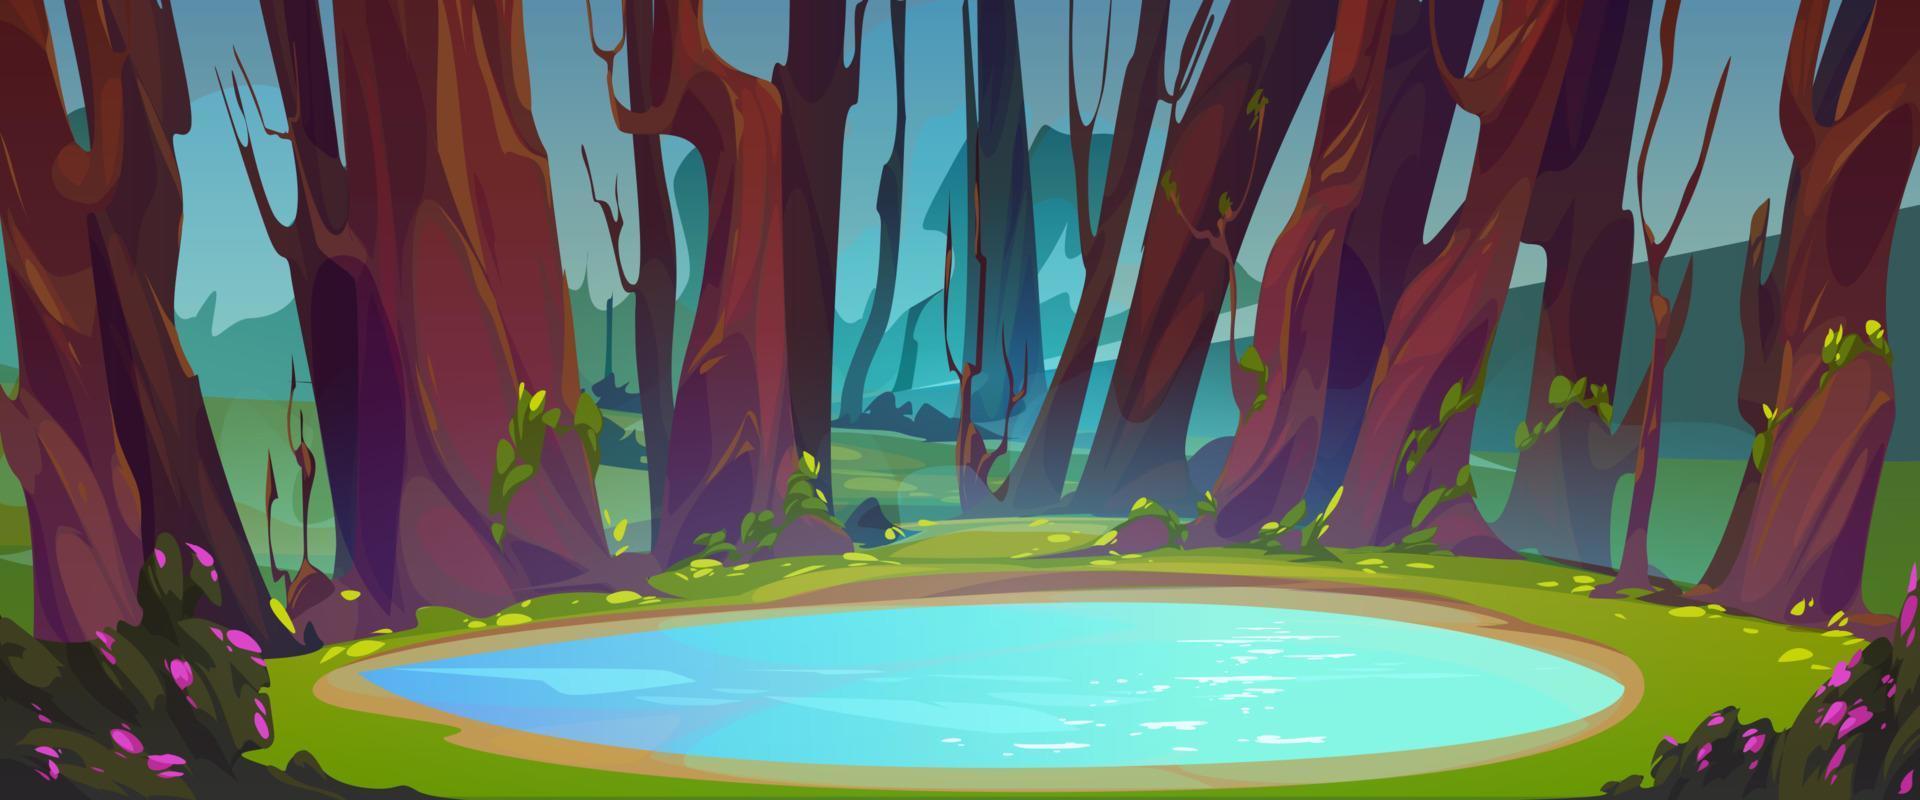 Forest landscape with lake on glade vector